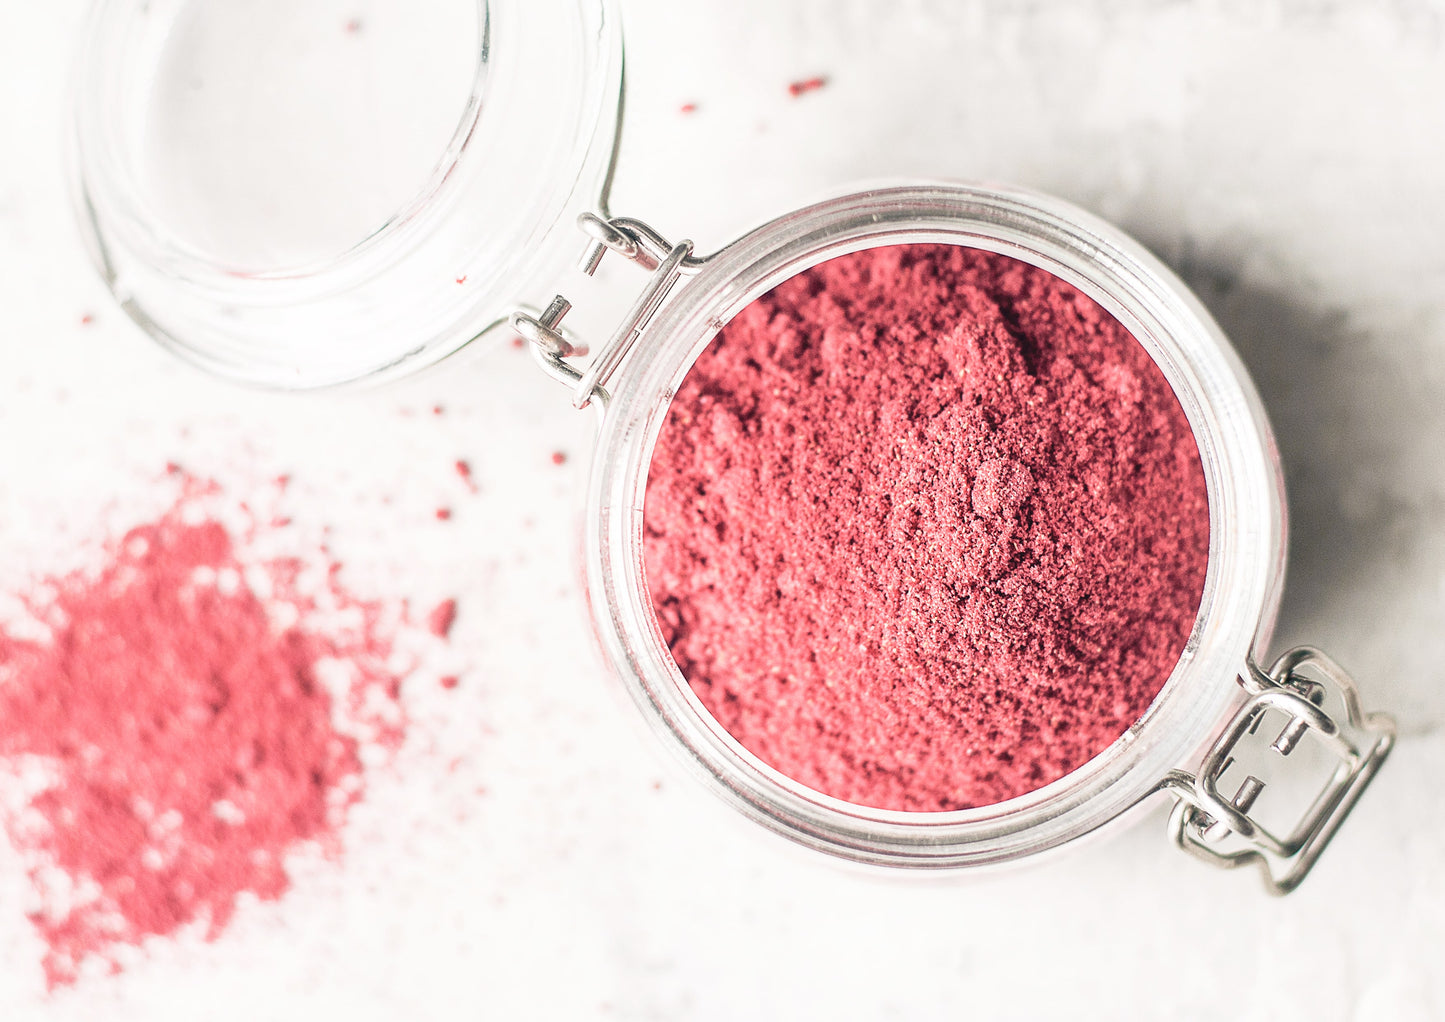 Organic Strawberry Powder – Non-GMO, Freeze-Dried, 100% Pure, No Additives, Vegan, Bulk. Easy to Mix. Rich in Vitamin C, Dietary Fiber. Great for Smoothies, Shakes, Baking